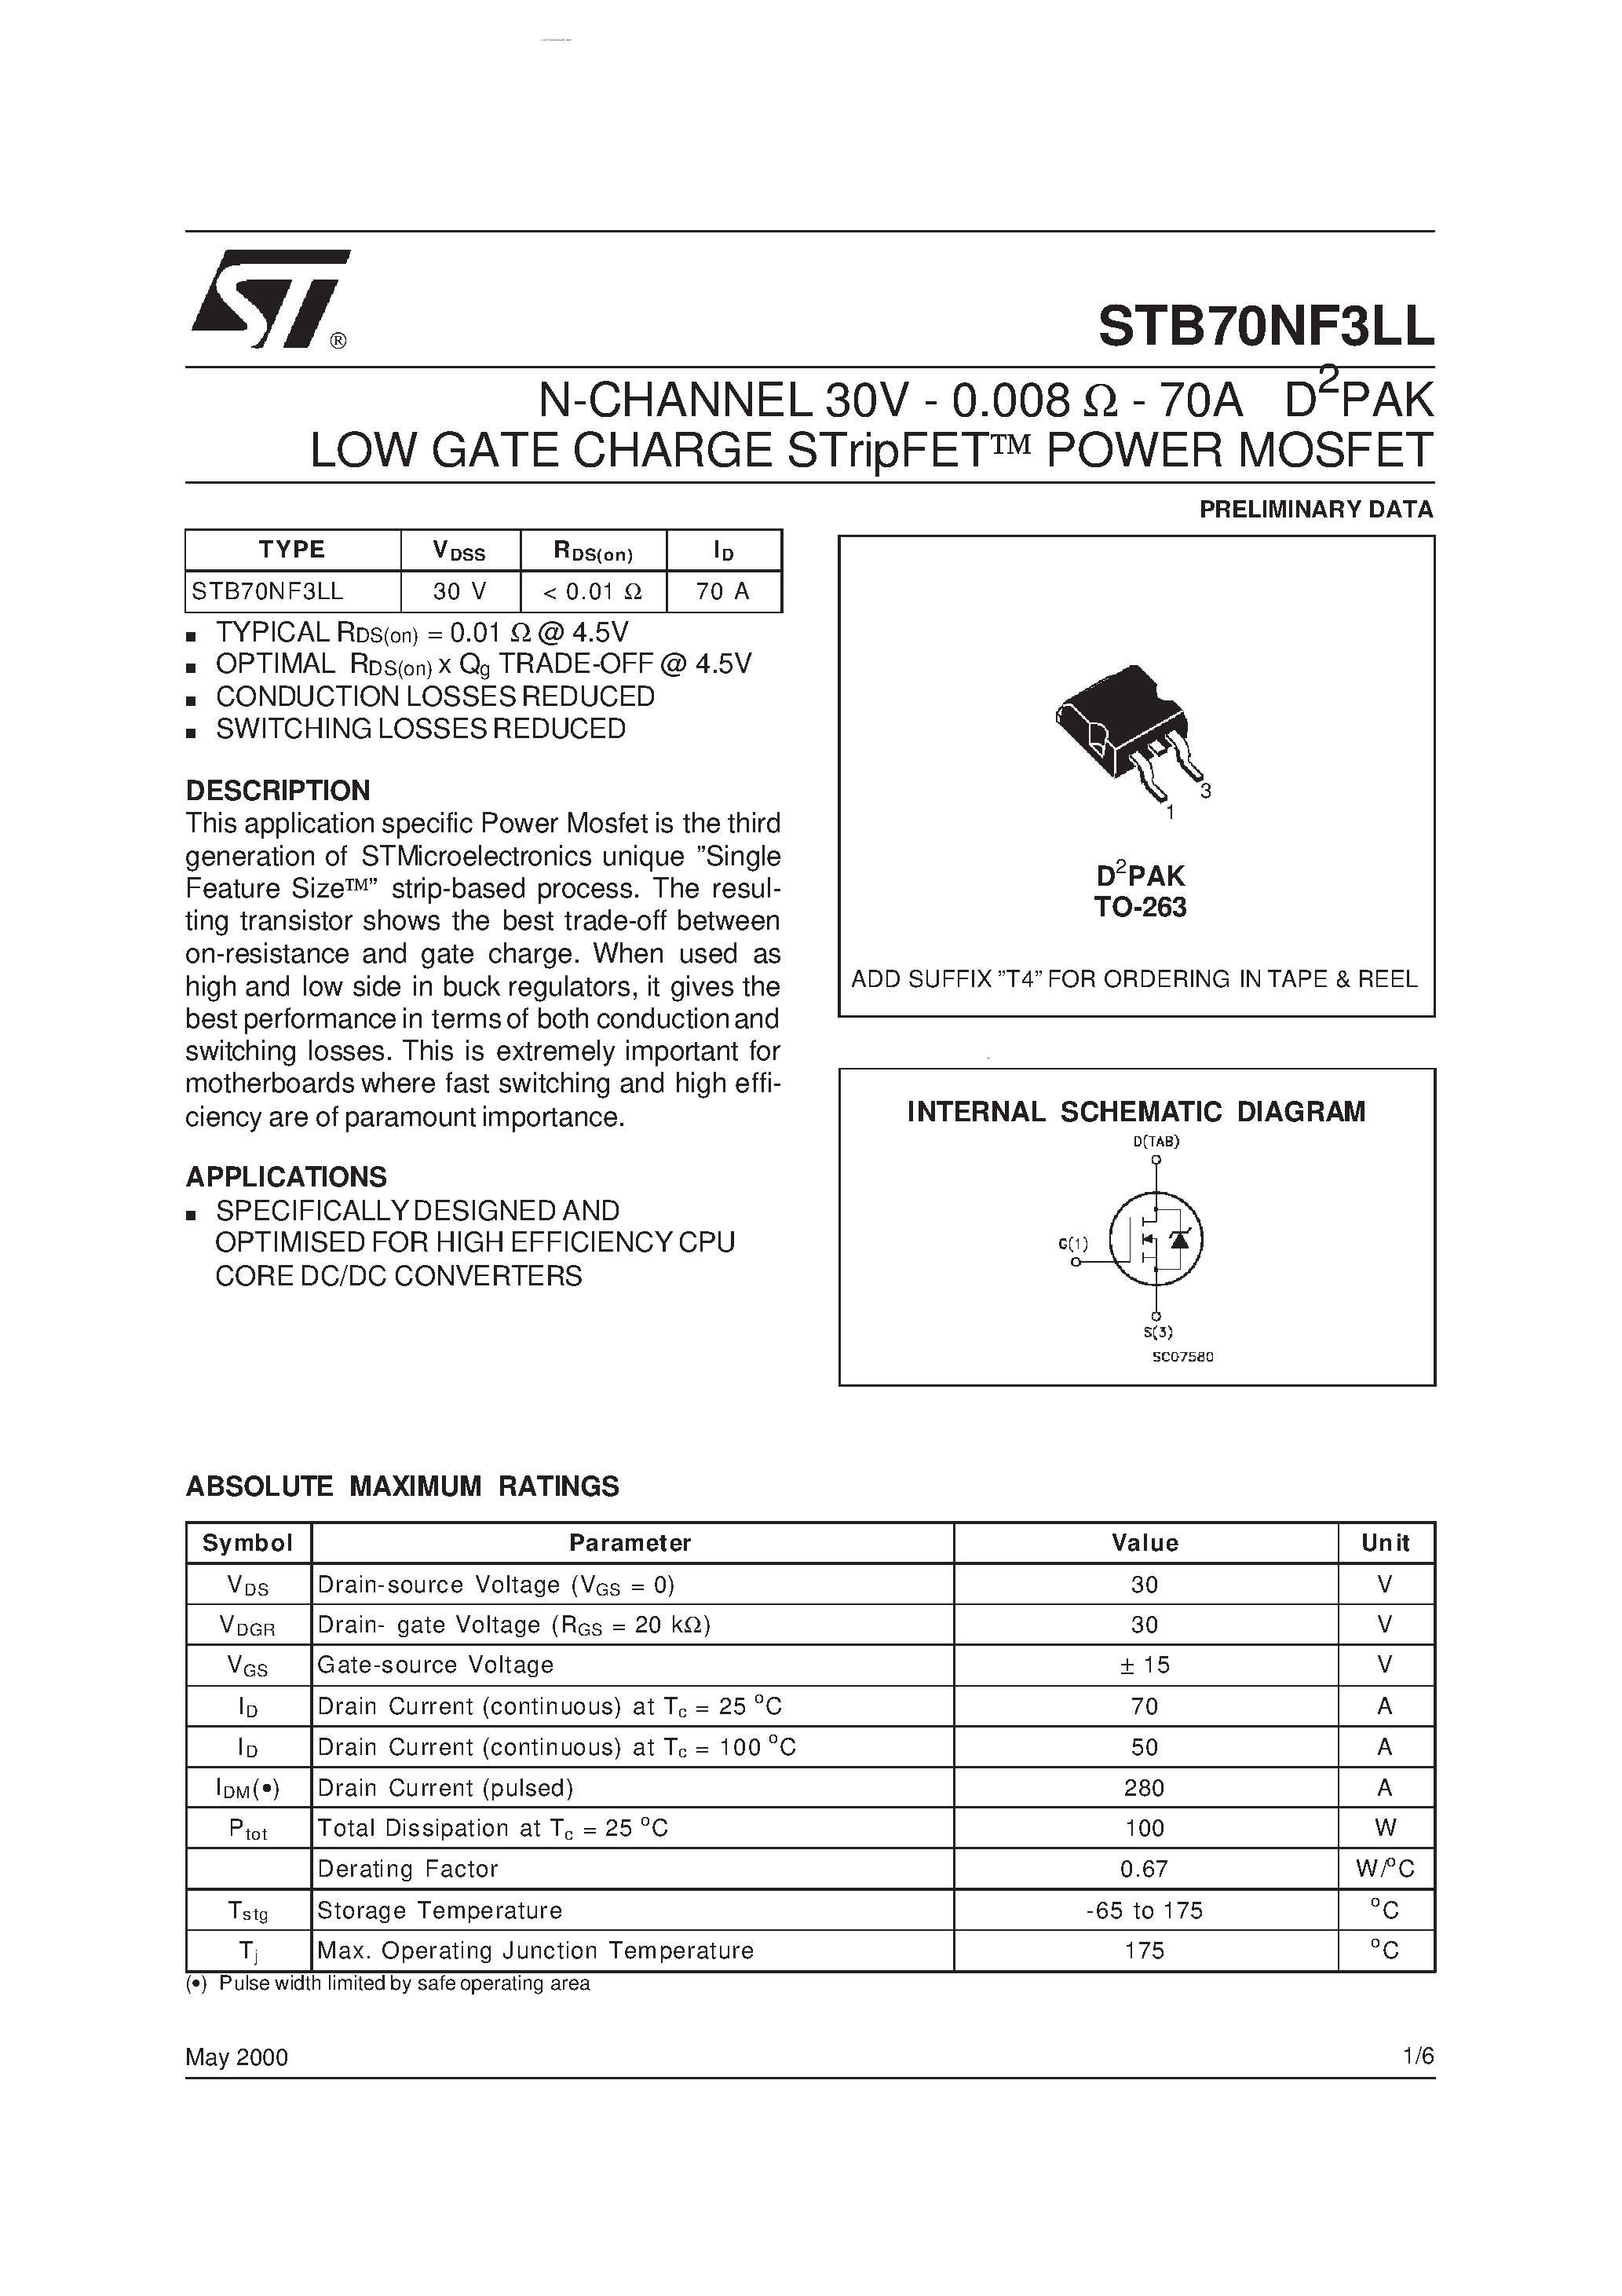 Datasheet STB70NF3LL - N-channel Power MOSFET page 1